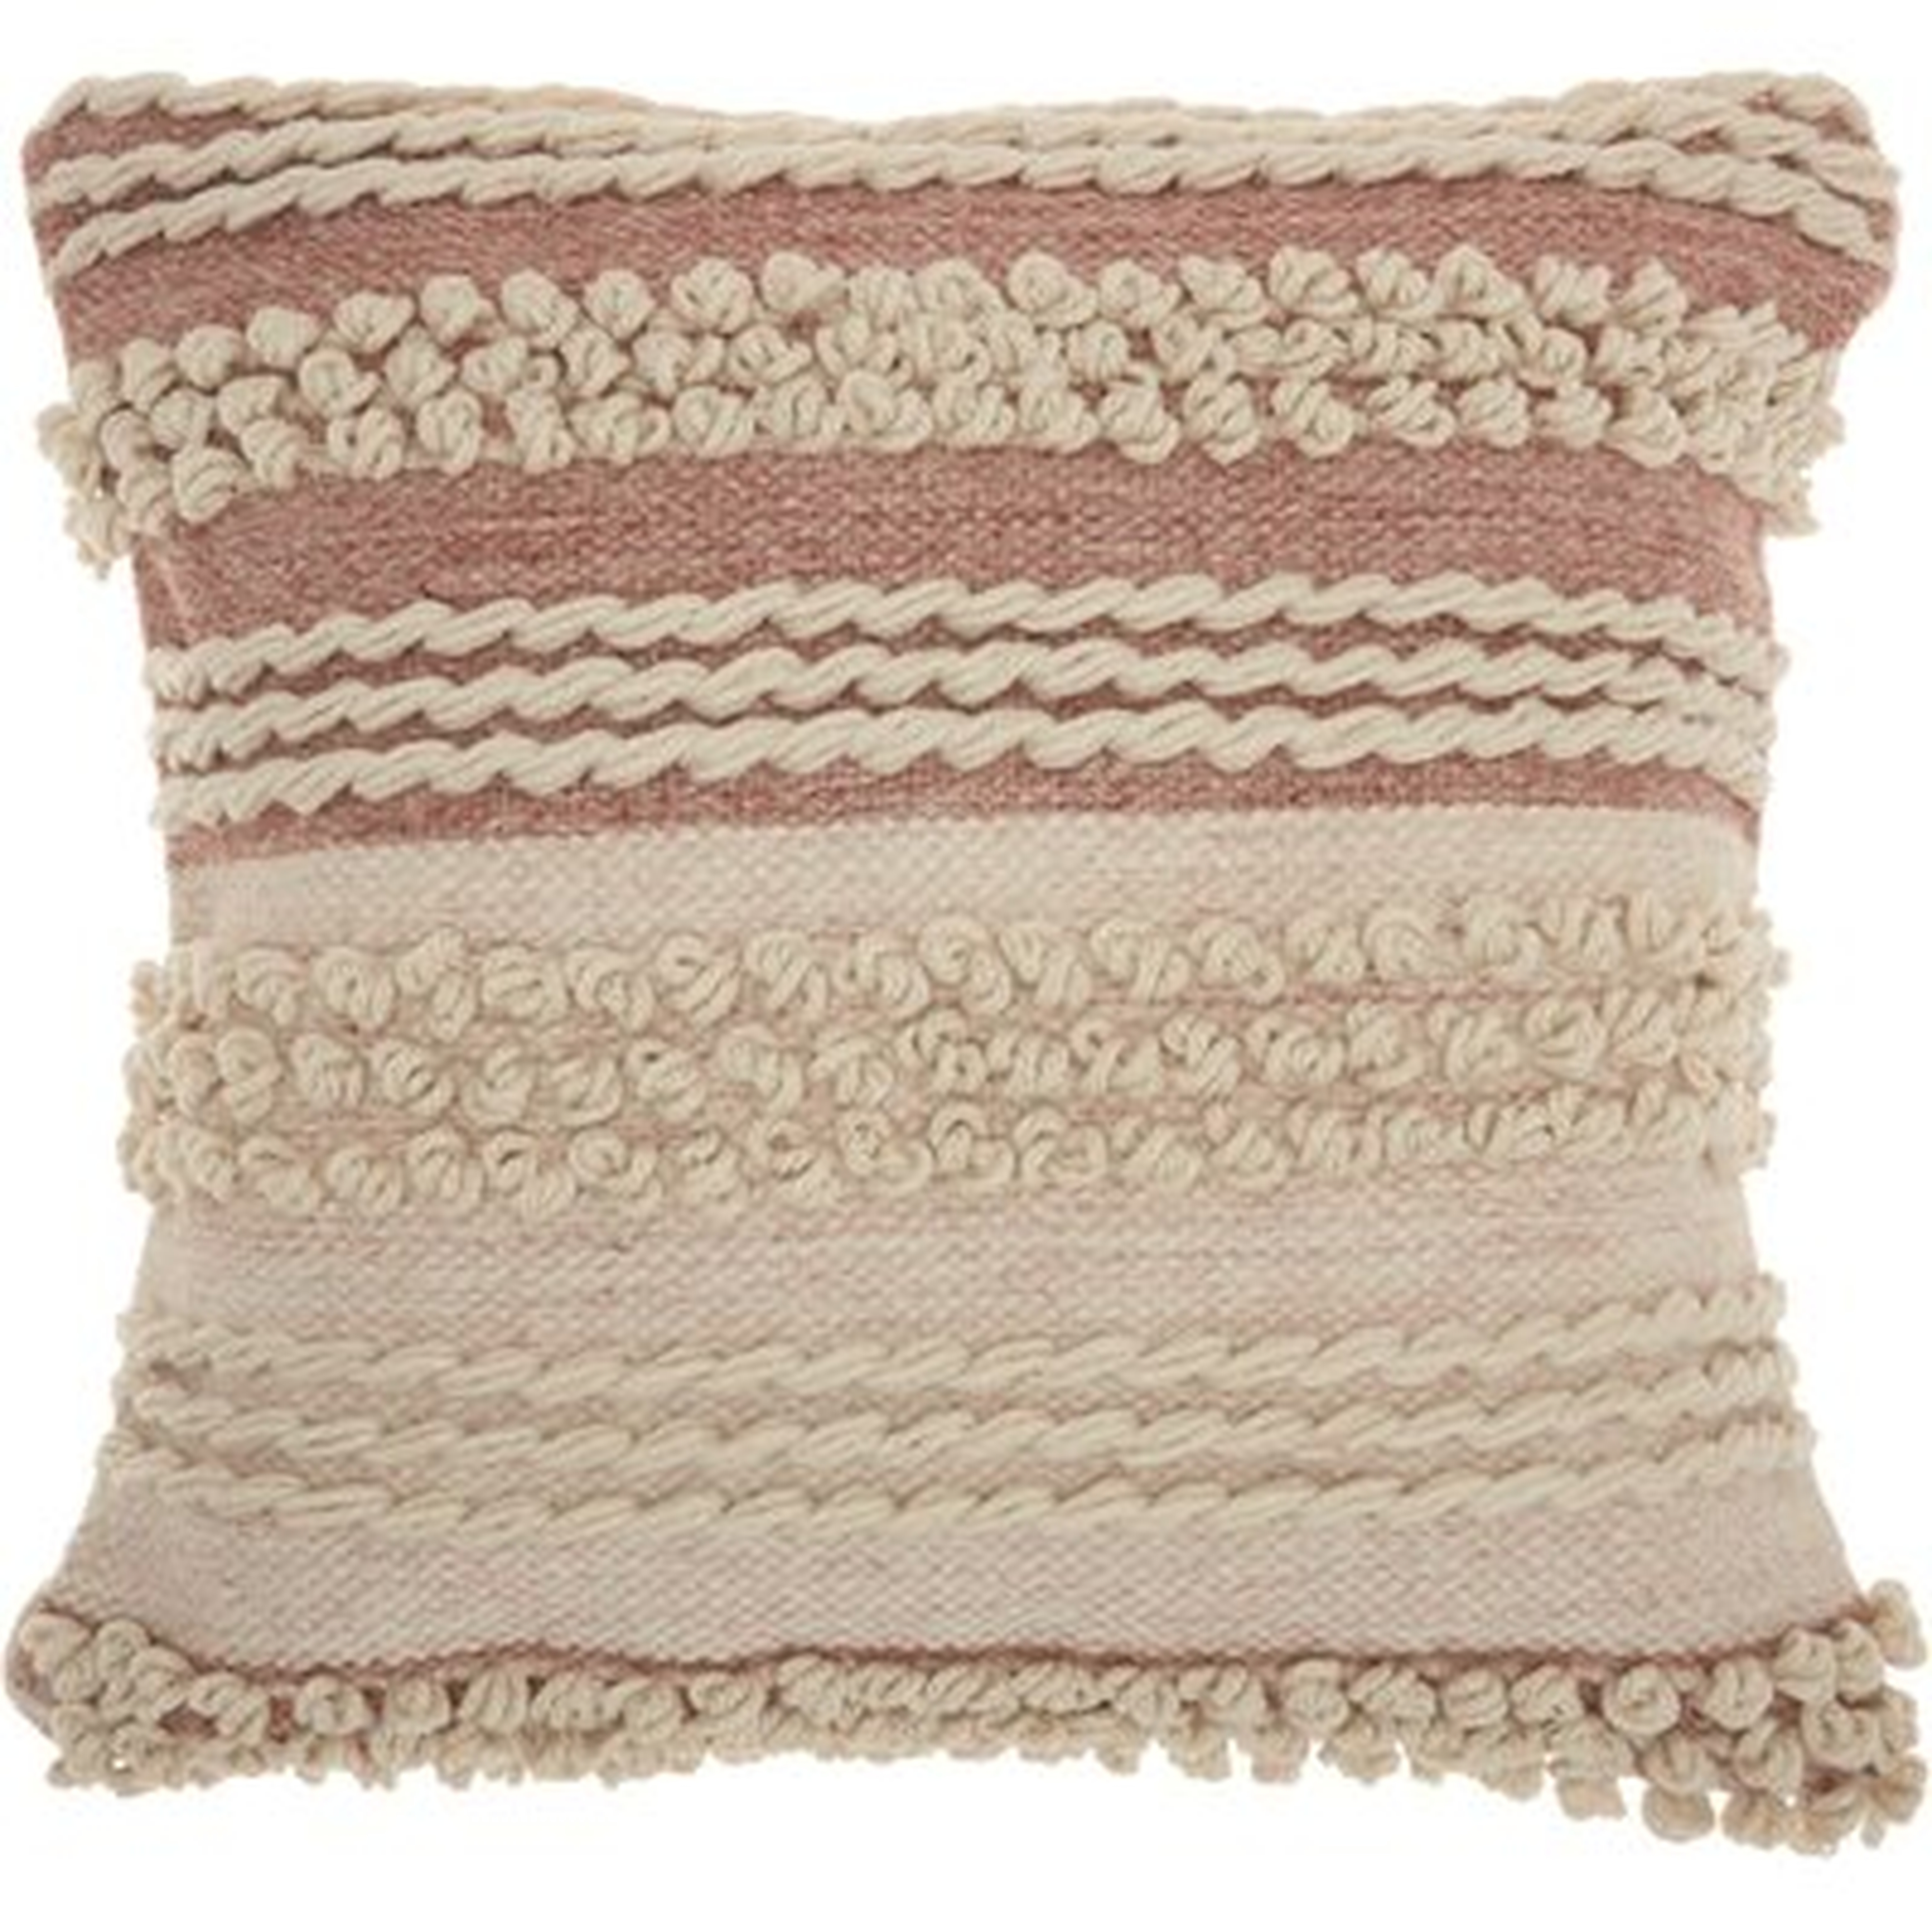 Ellijay Square Pillow Cover and Insert - Wayfair